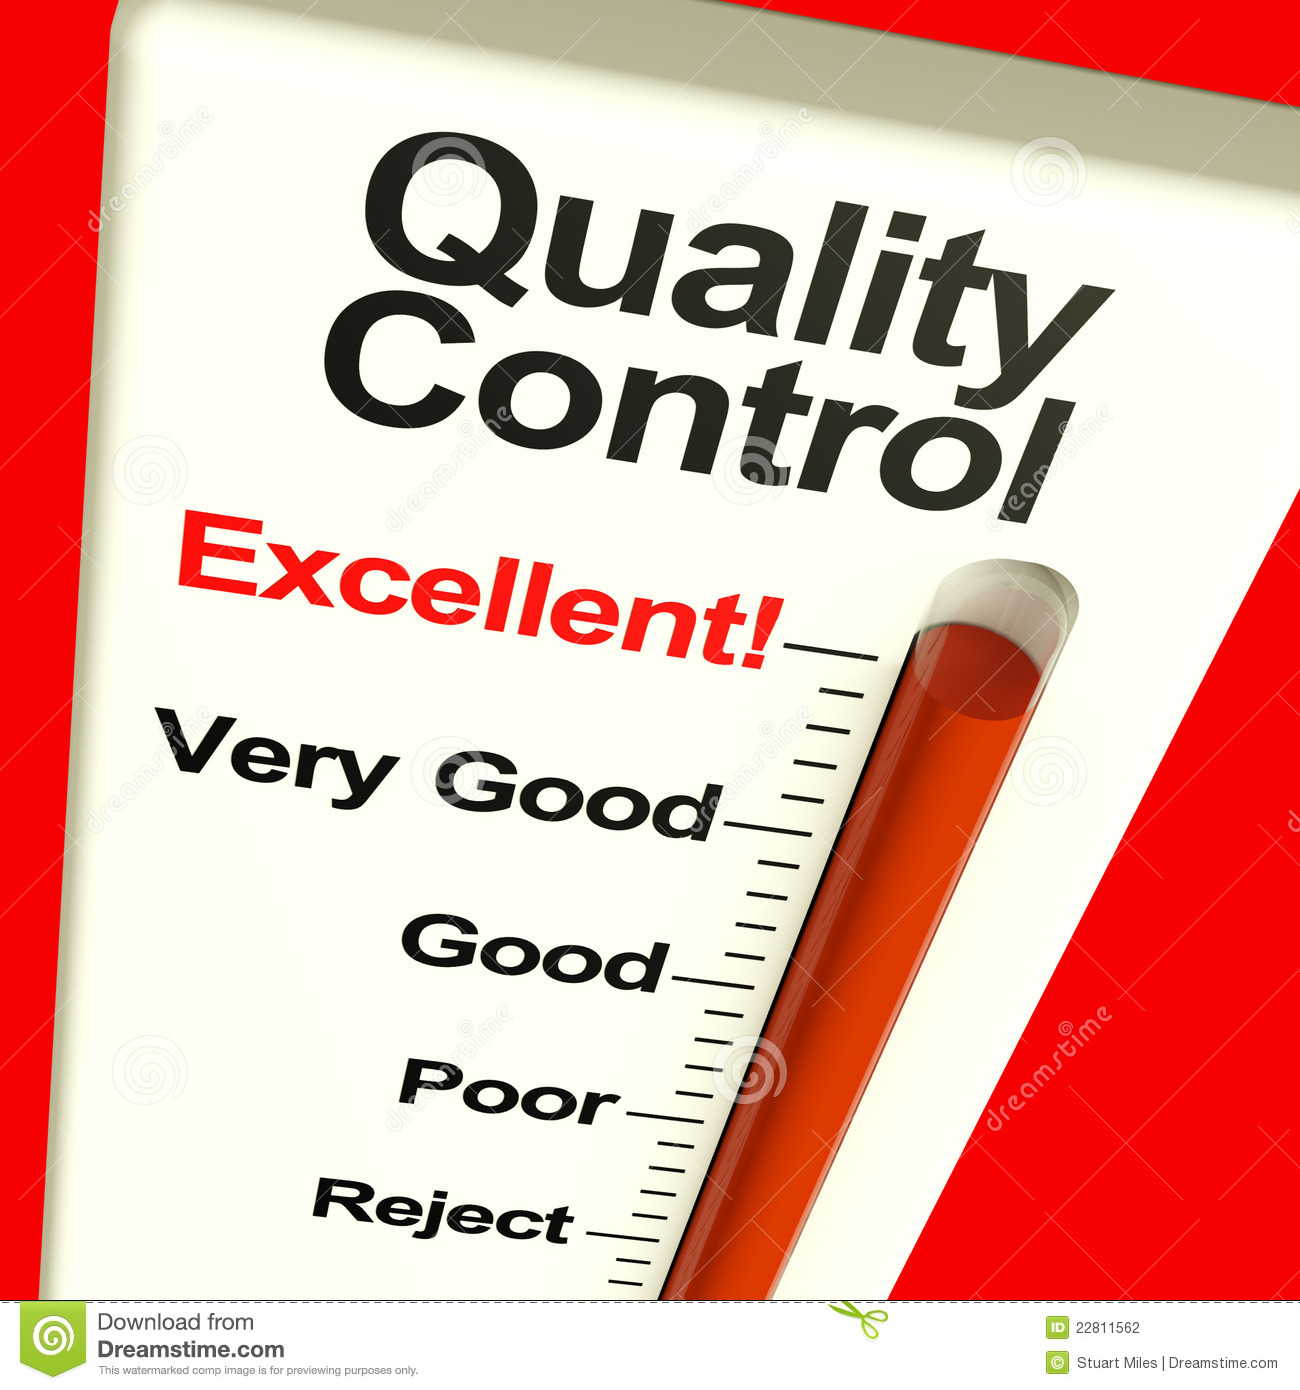 Quality Control Excellent Monitor Stock Photography   Image  22811562